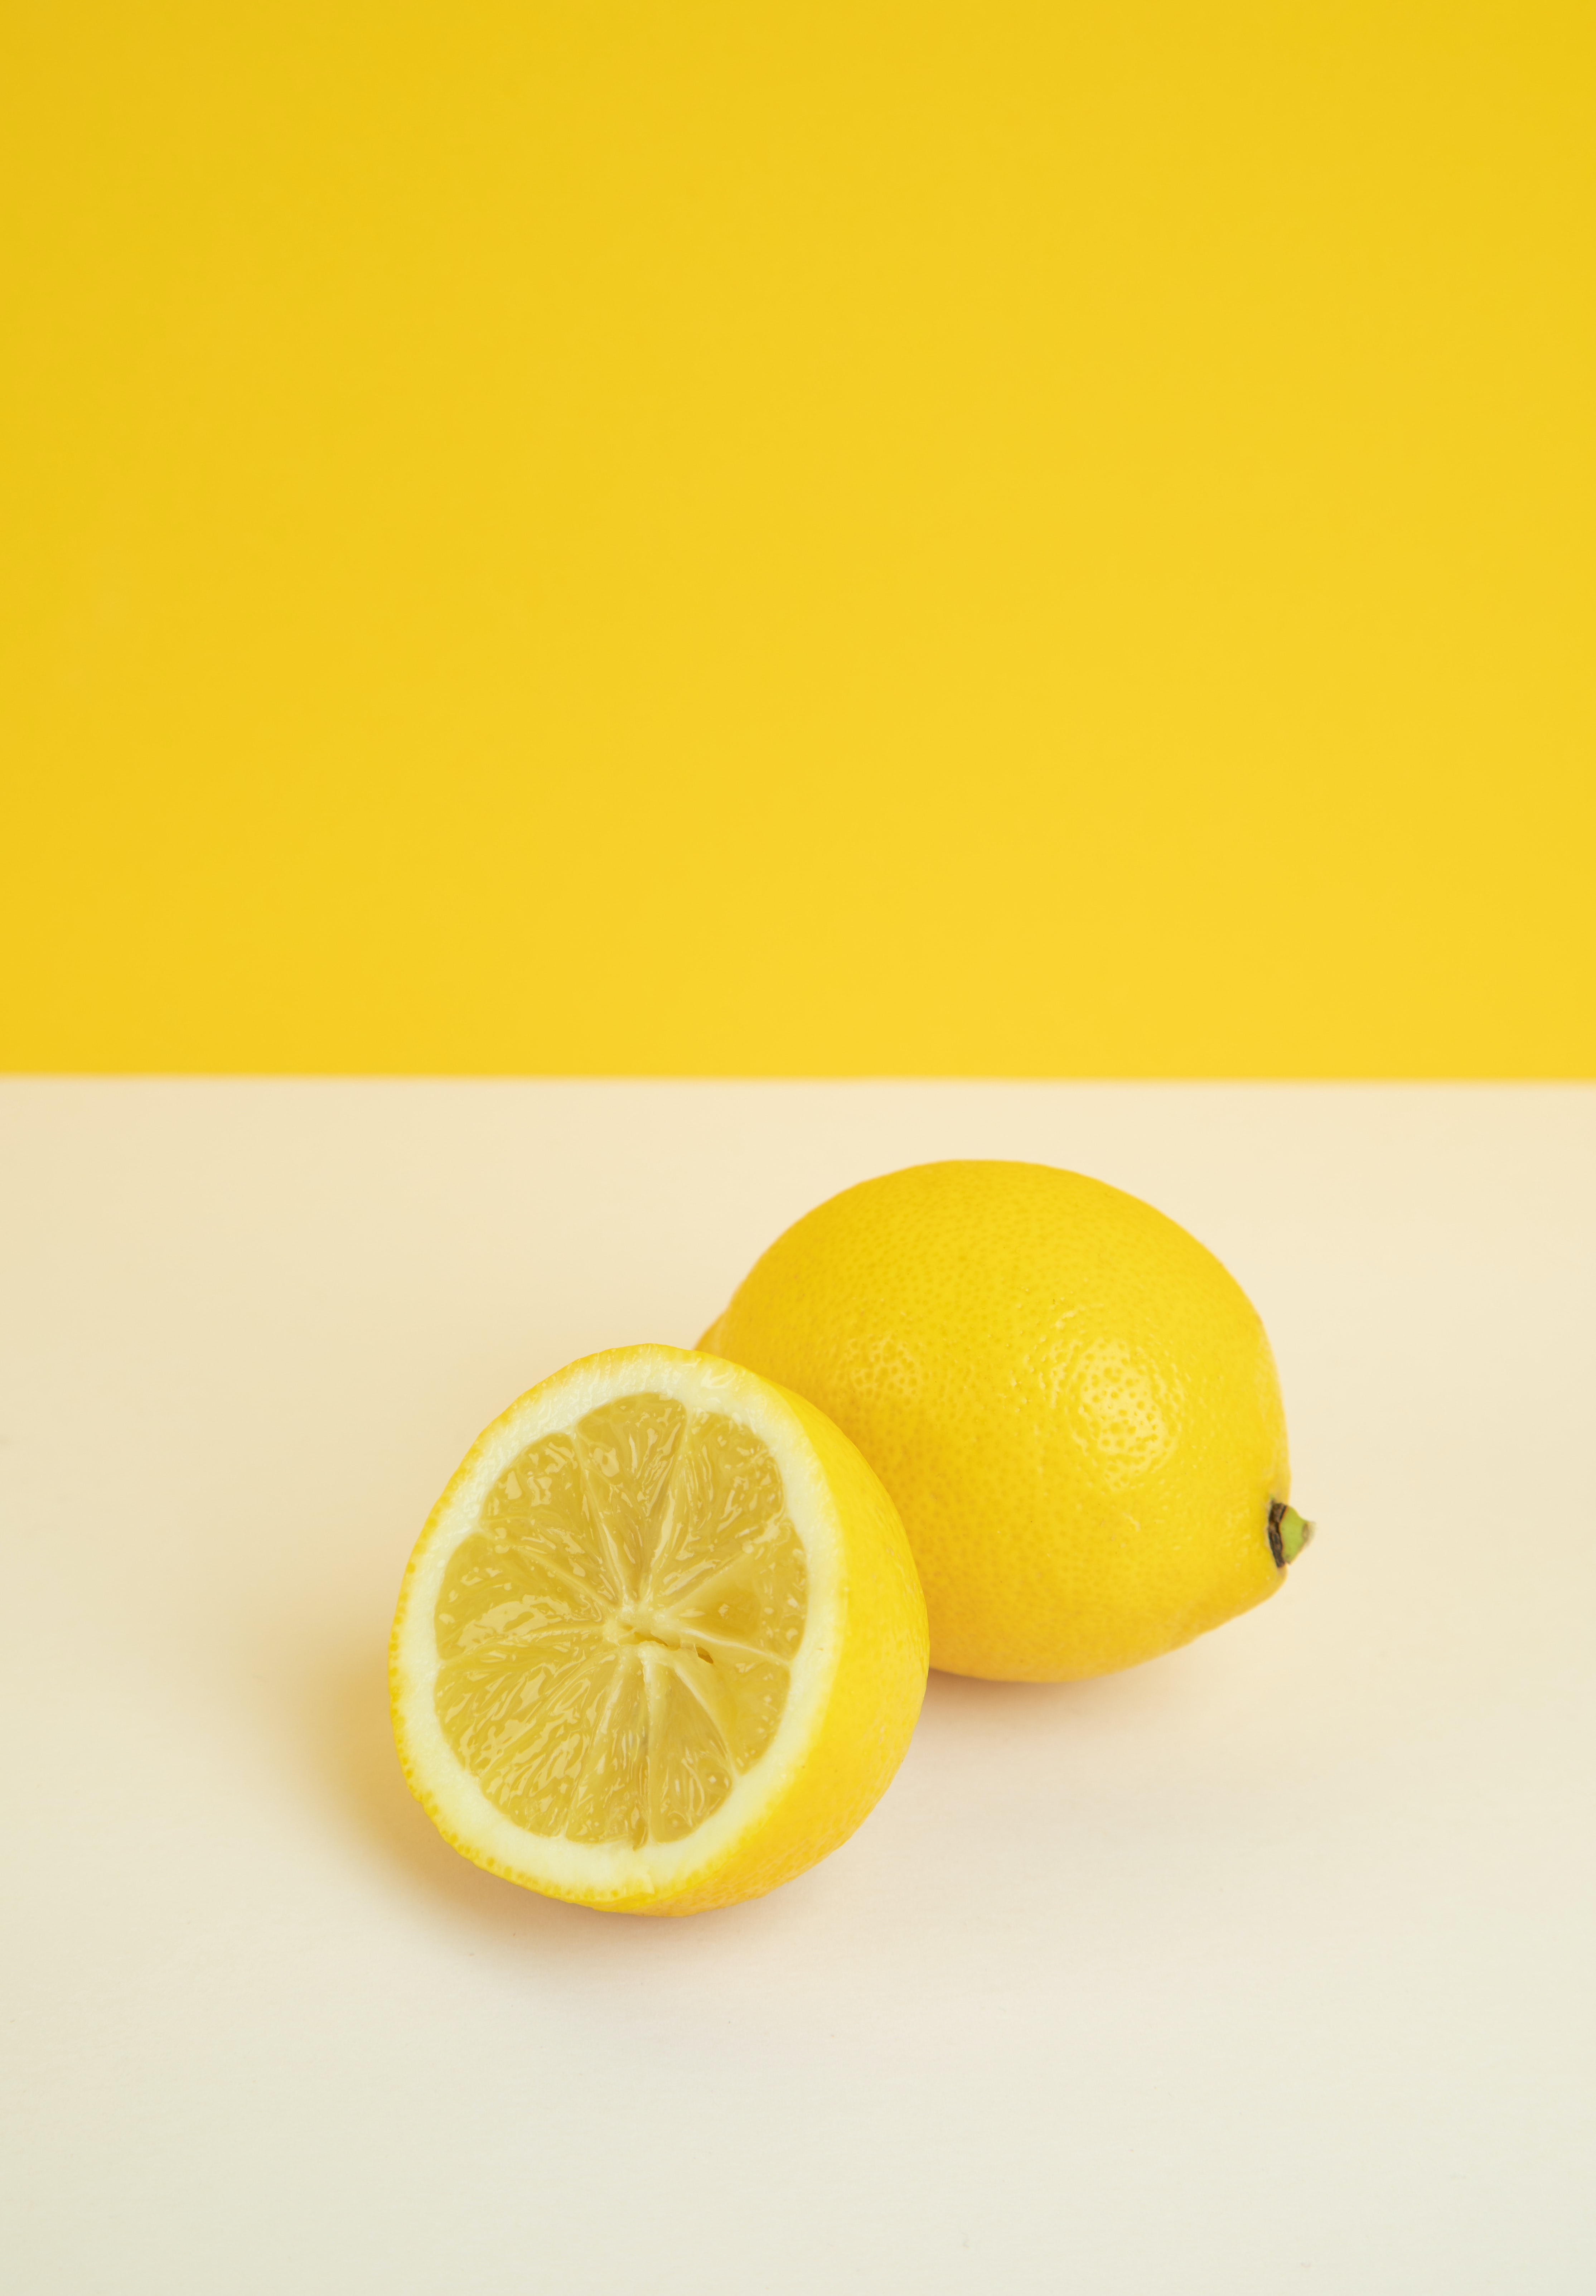 117334 Screensavers and Wallpapers Lemon for phone. Download food, yellow, minimalism, lemon, fruit, citrus pictures for free